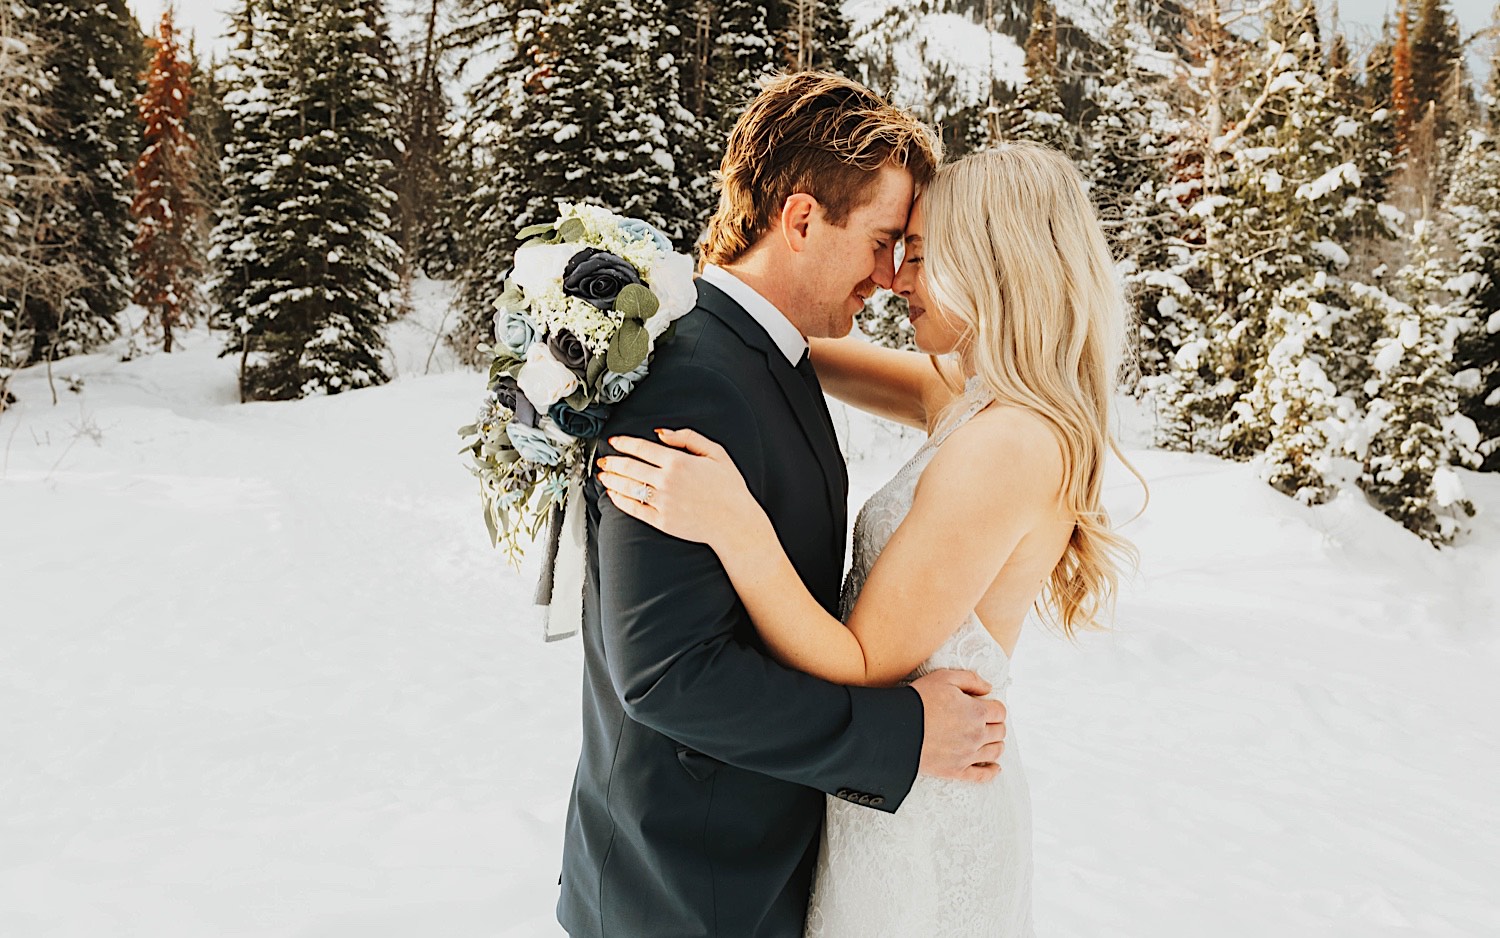 In a snow covered forest near Salt Lake City, a bride and groom smile at one another while touching their foreheads together during their elopement